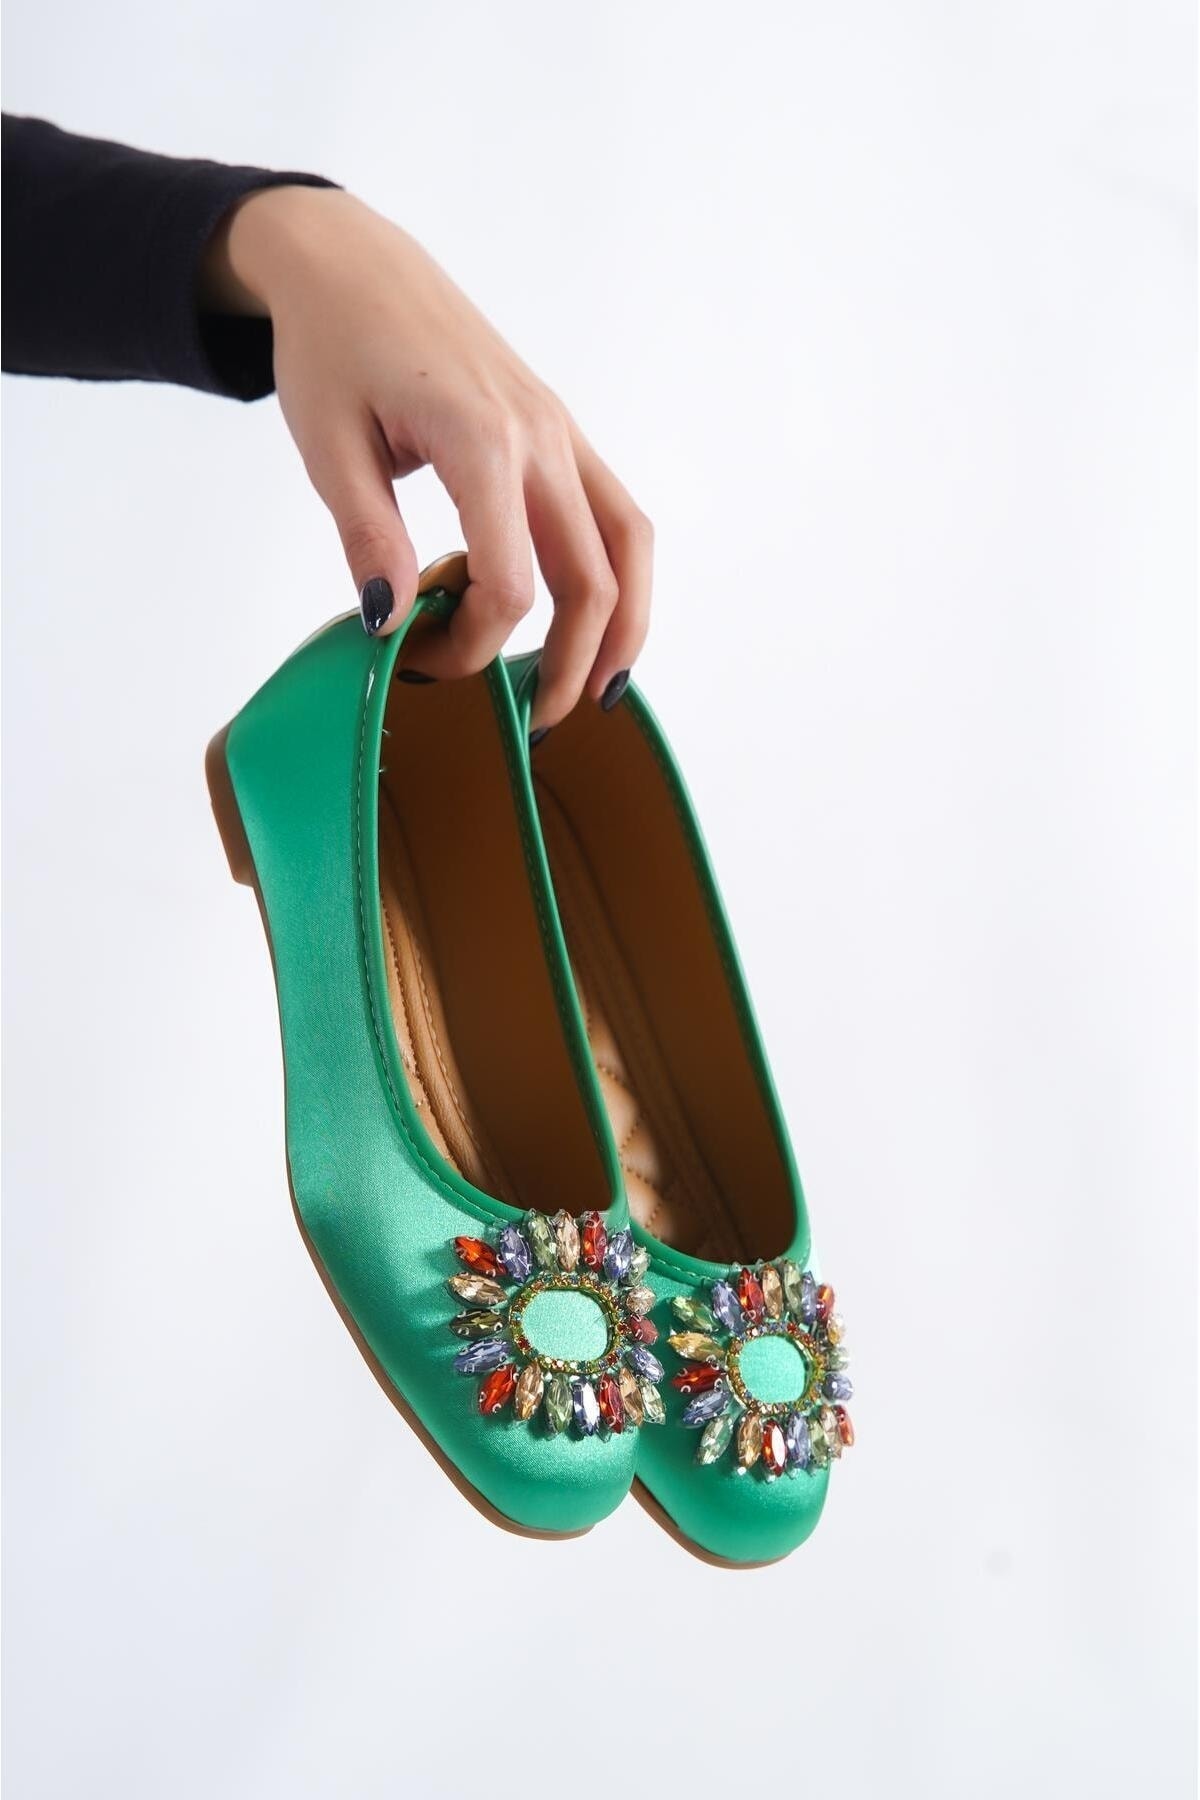 Capone Outfitters Ballerina Flats - Green - Flat